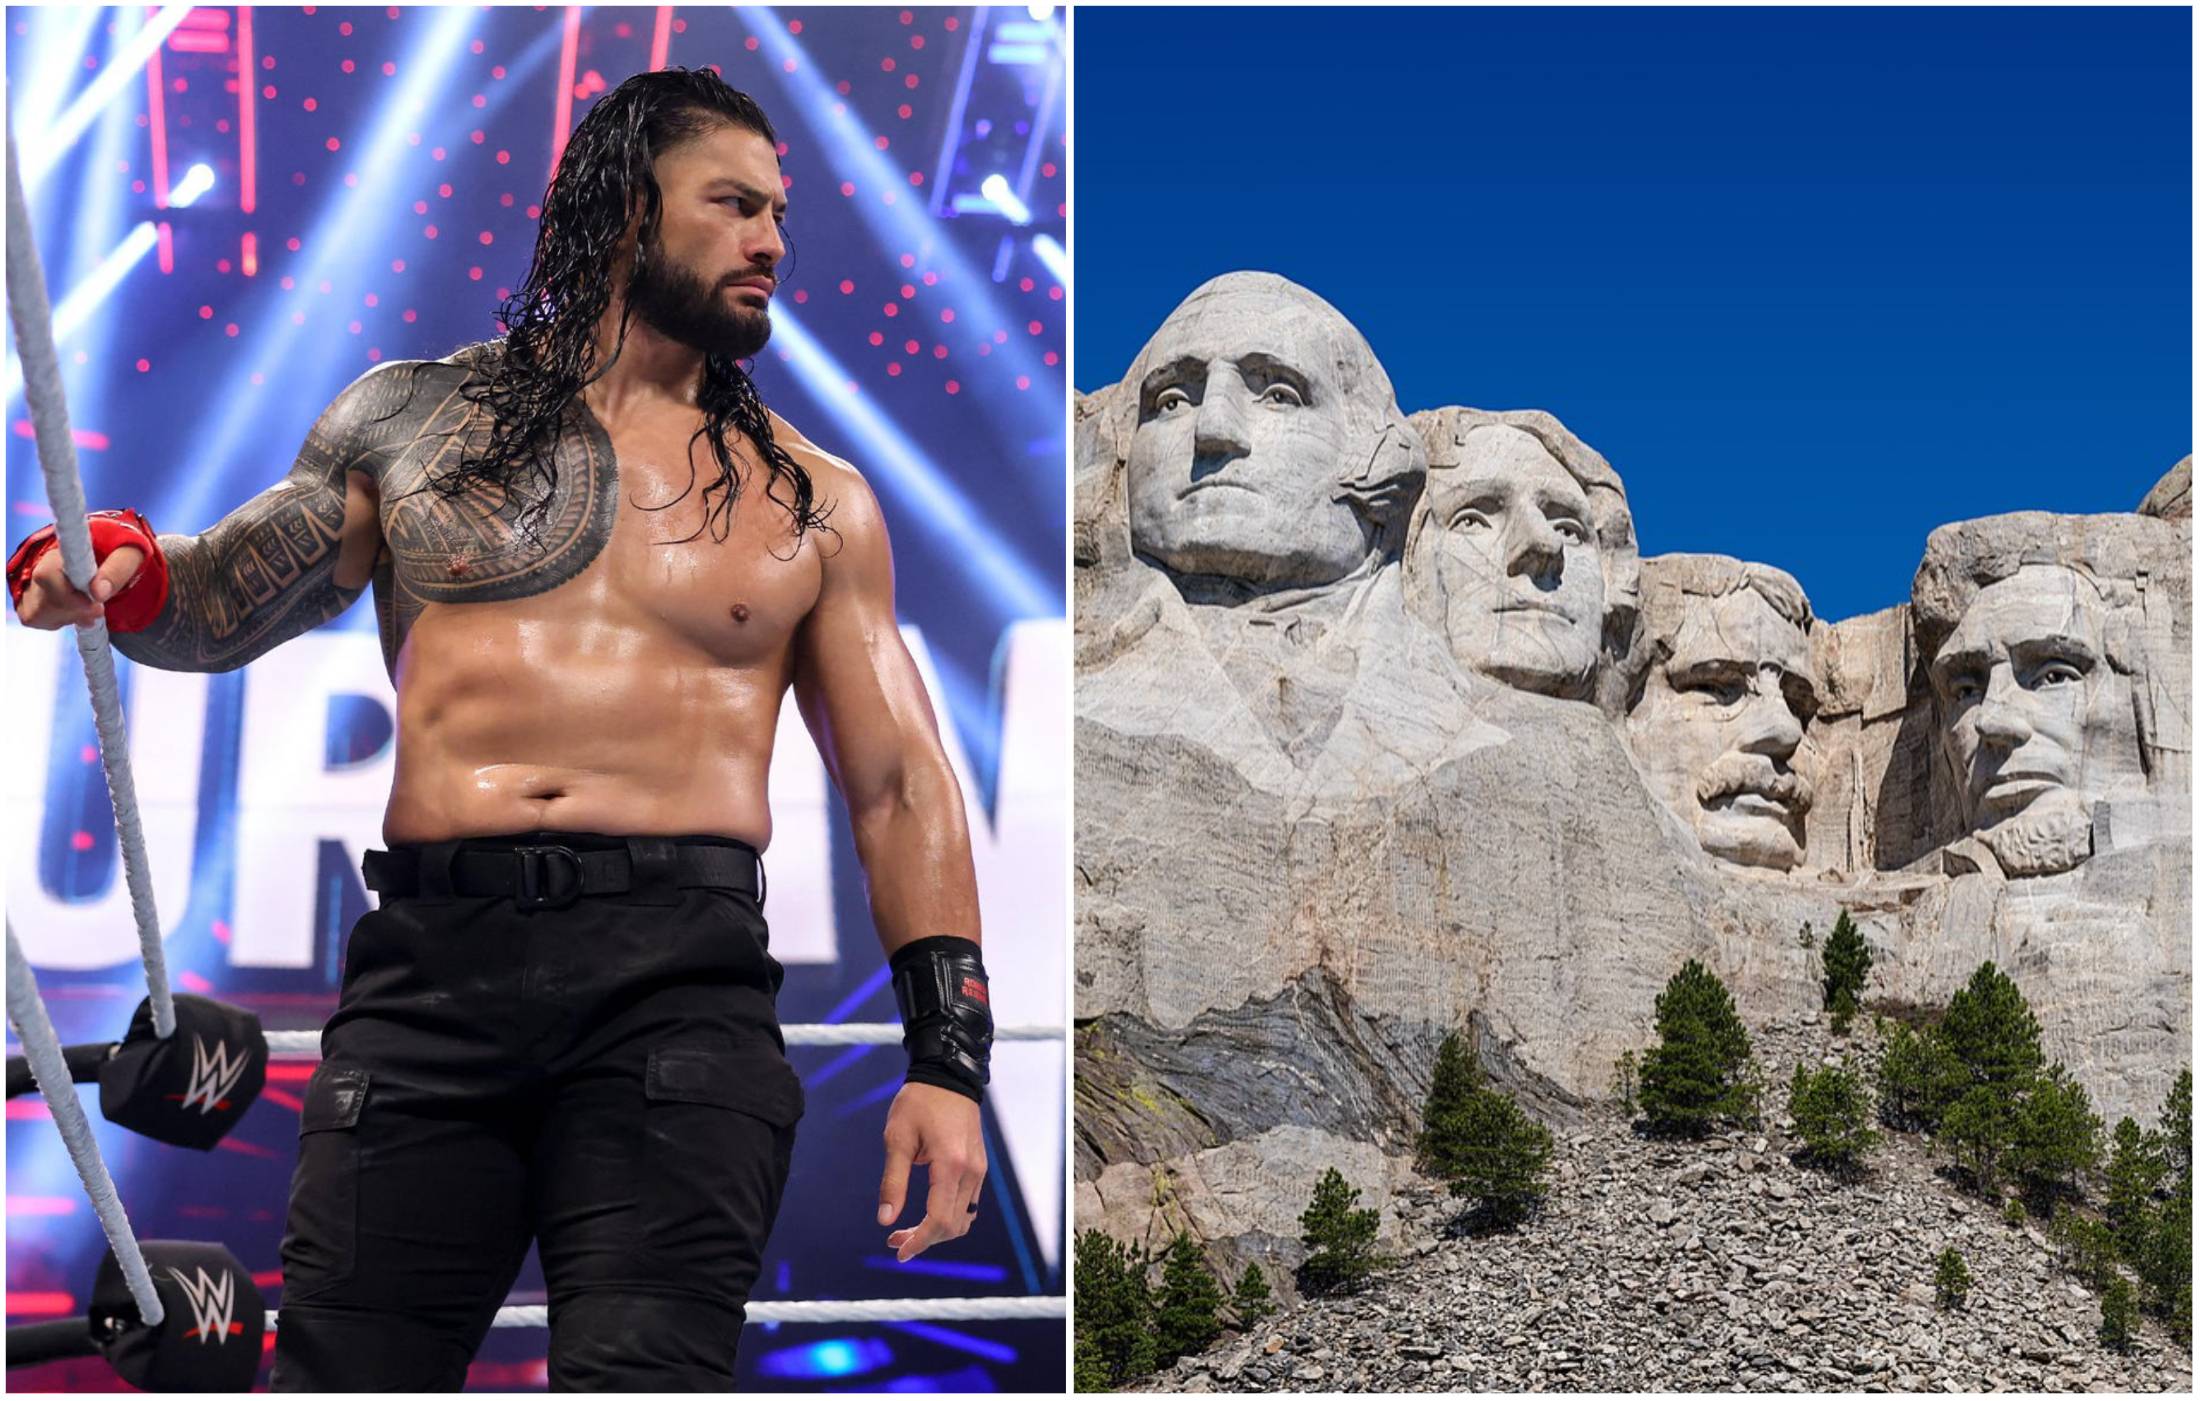 Roman Reigns' WWE Mount Rushmore is going to raise some eyebrows